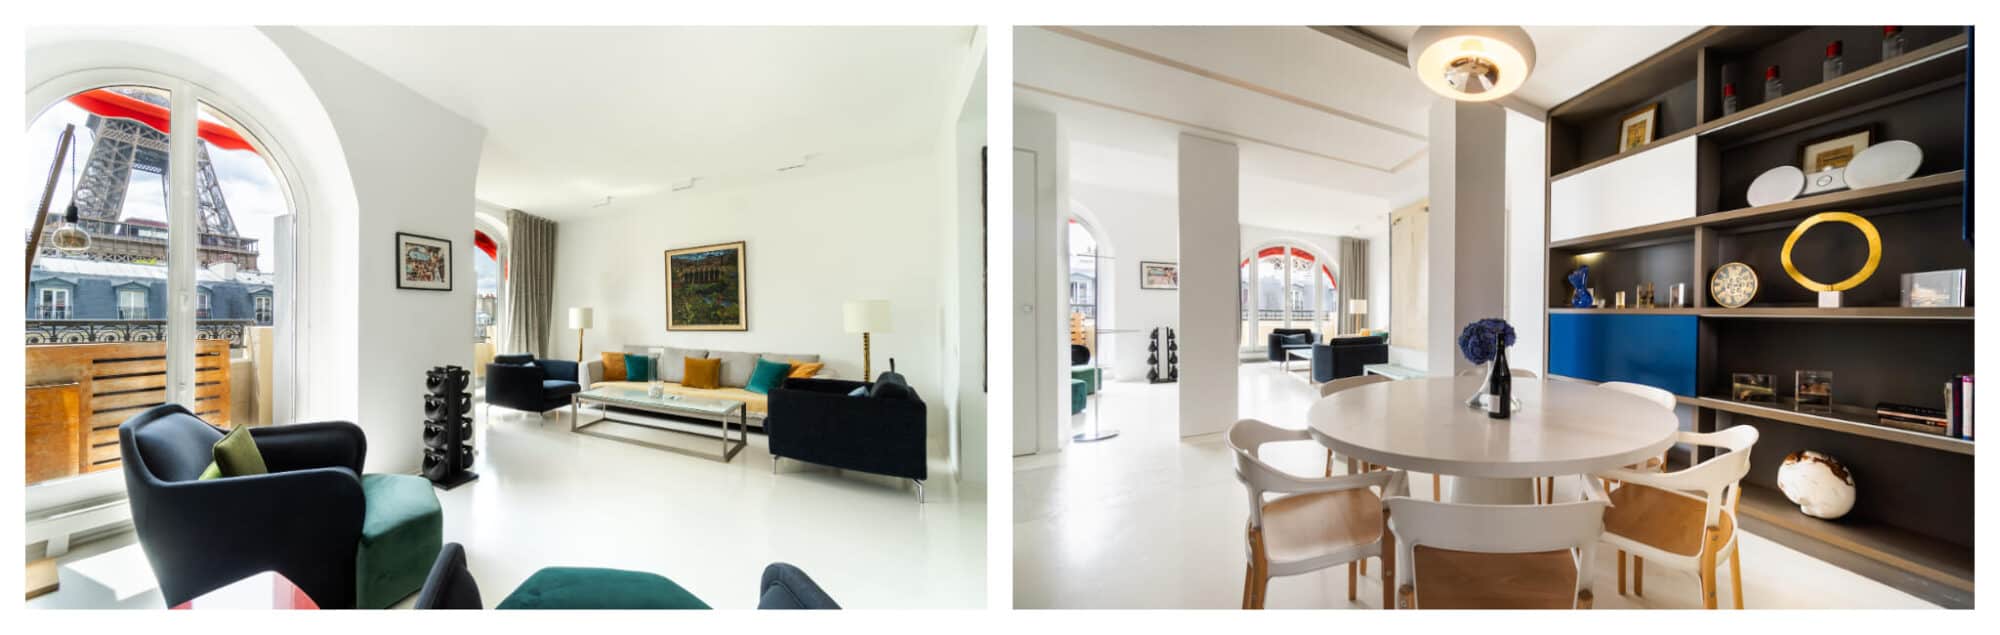 left: the living room of the apartment on Avenue de la Bourdonnais with Eiffel Tower views; right: the dining room of the same apartment, decorated in a modern style.